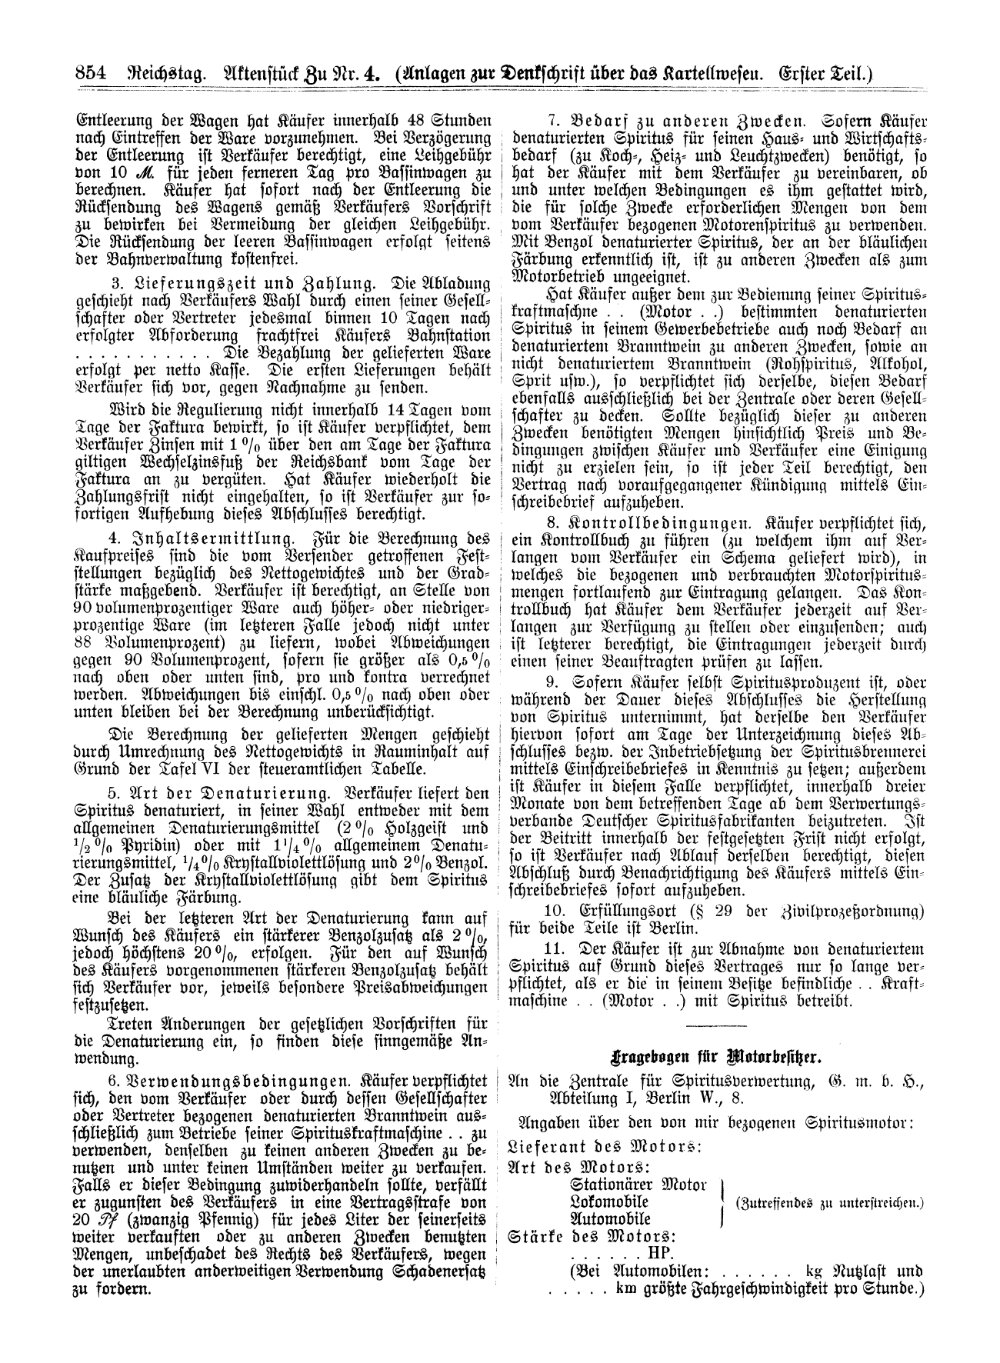 Scan of page 854